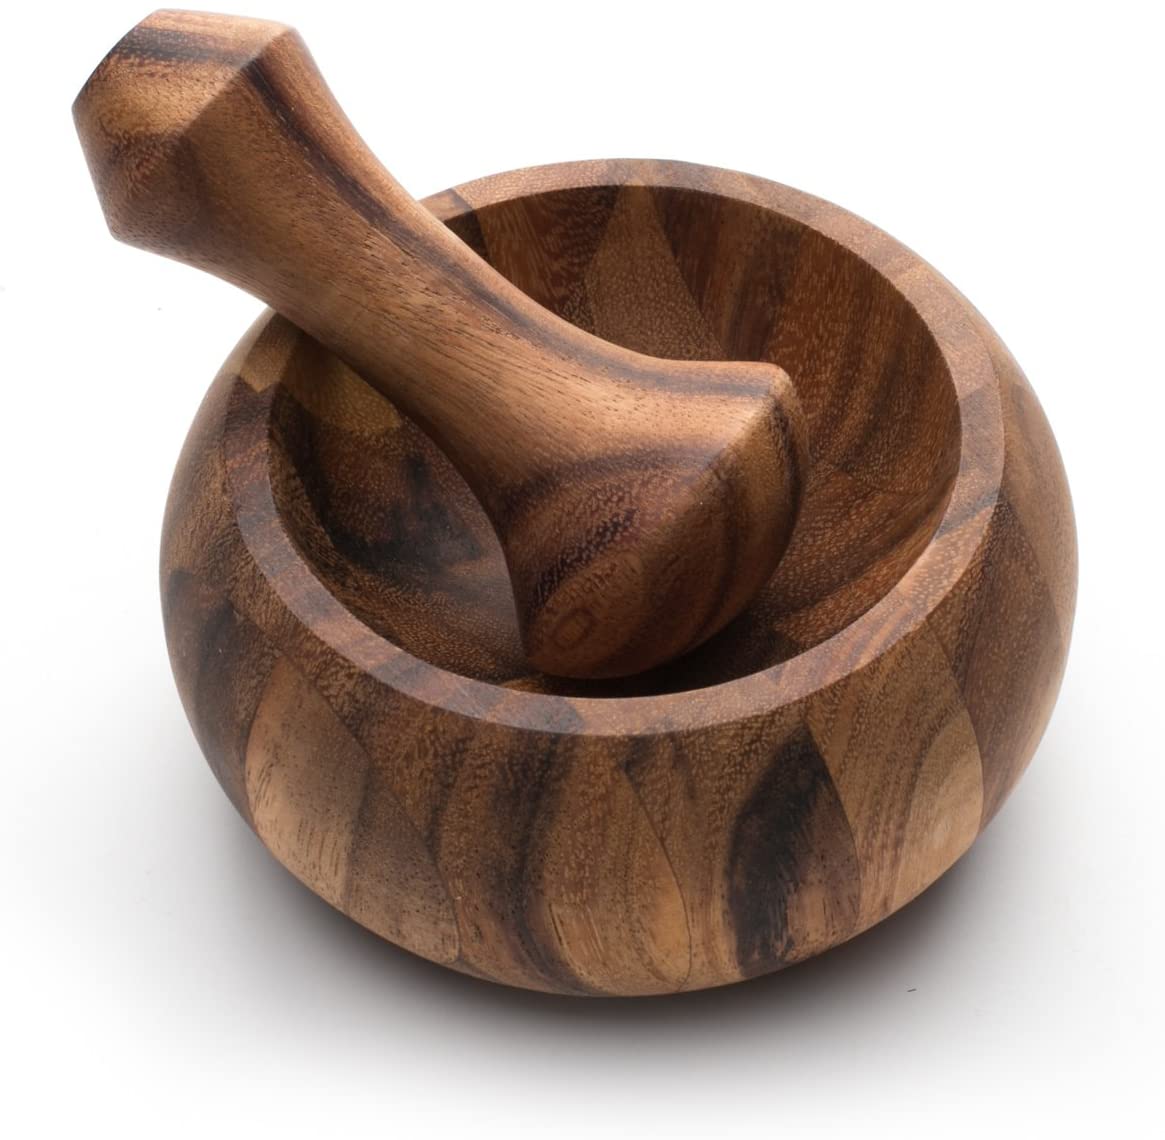 What is a wooden Mortar and Pestle Used For? 